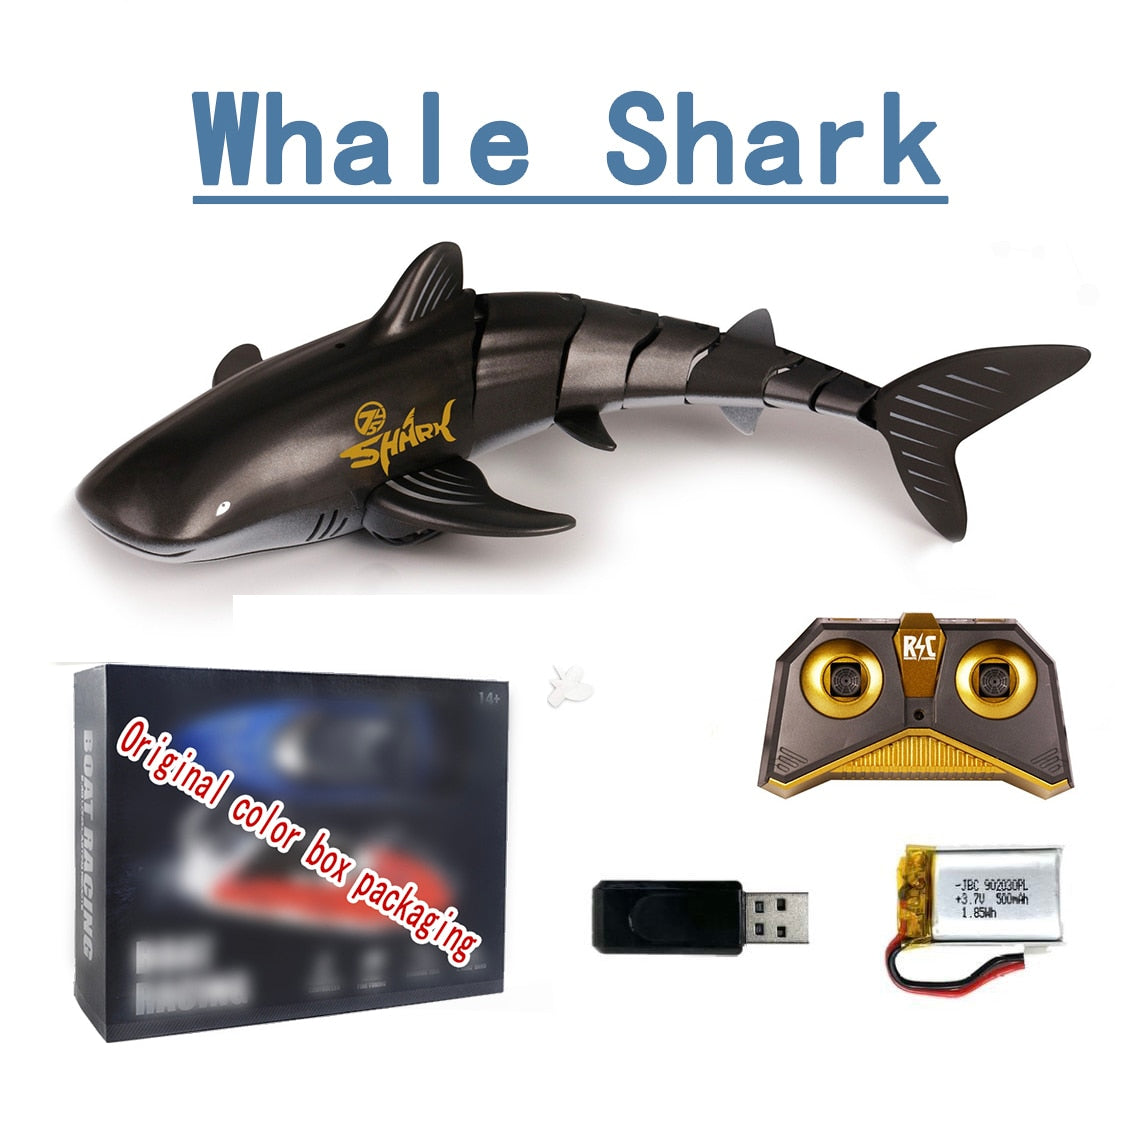 Remote Control Shark Toy Robots RC Electric Sharks toy